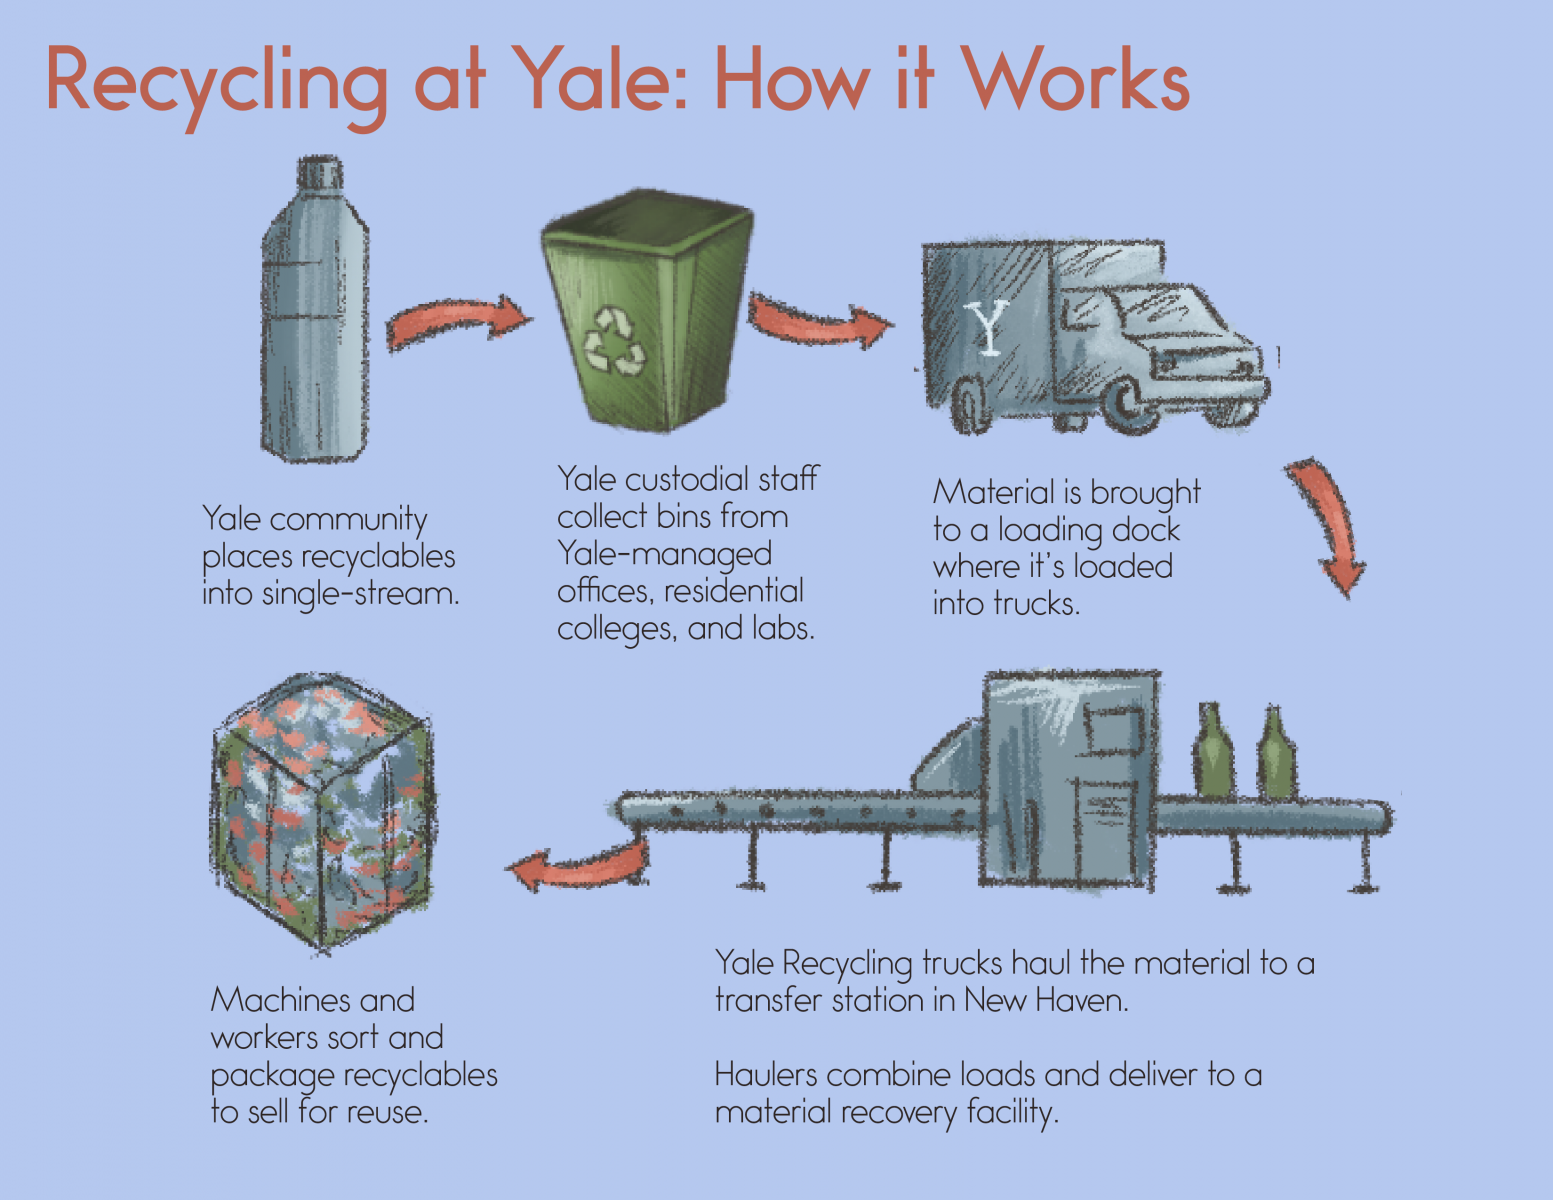 An illustration depicting the recycling process at Yale